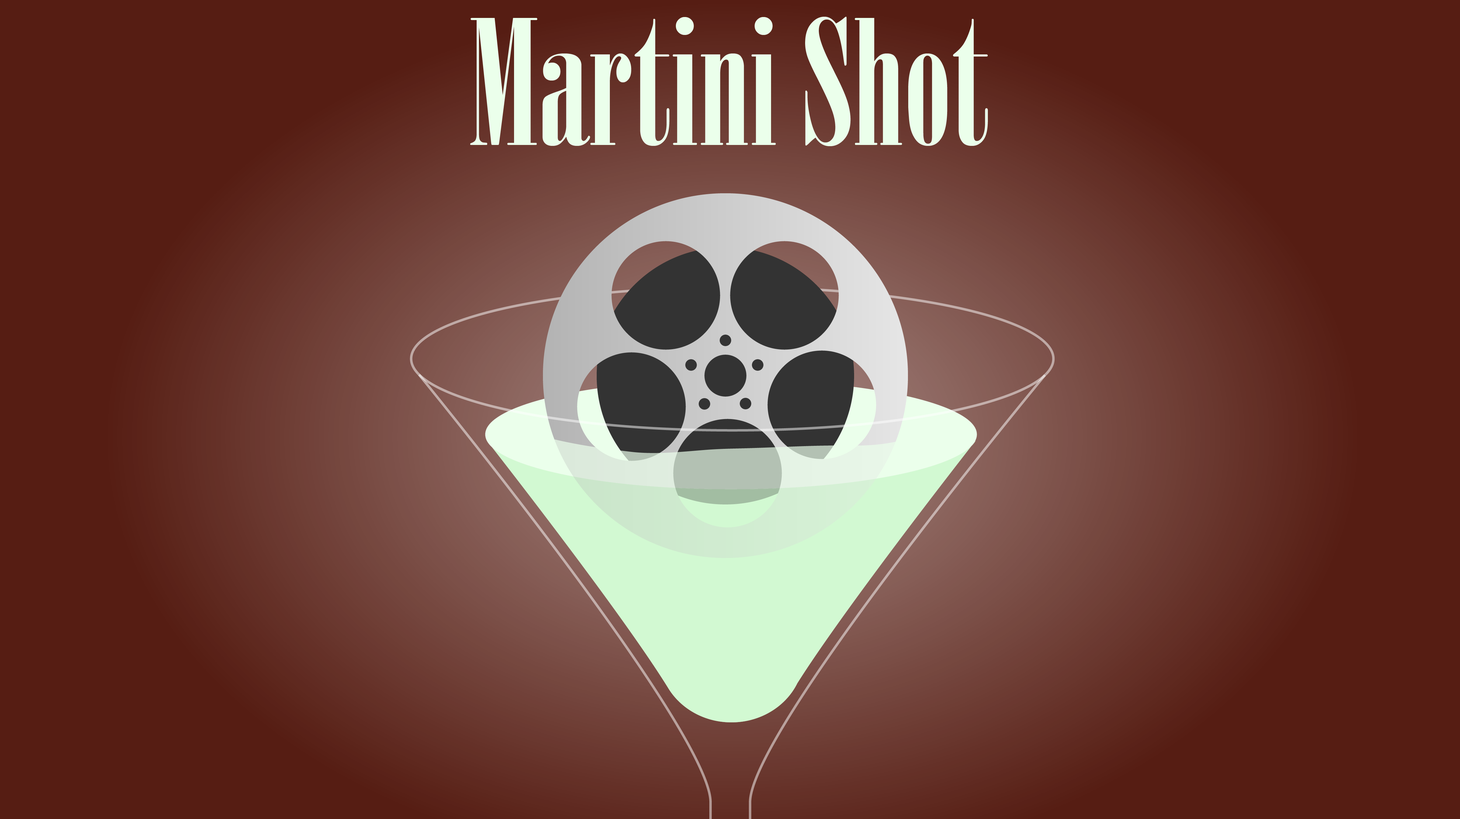 This is Rob Long, and on today’s Martini Shot I talk about impossible it is for some people to remember that they have enough stuff, enough of everything. And by some people I mean, me. But maybe not just me.